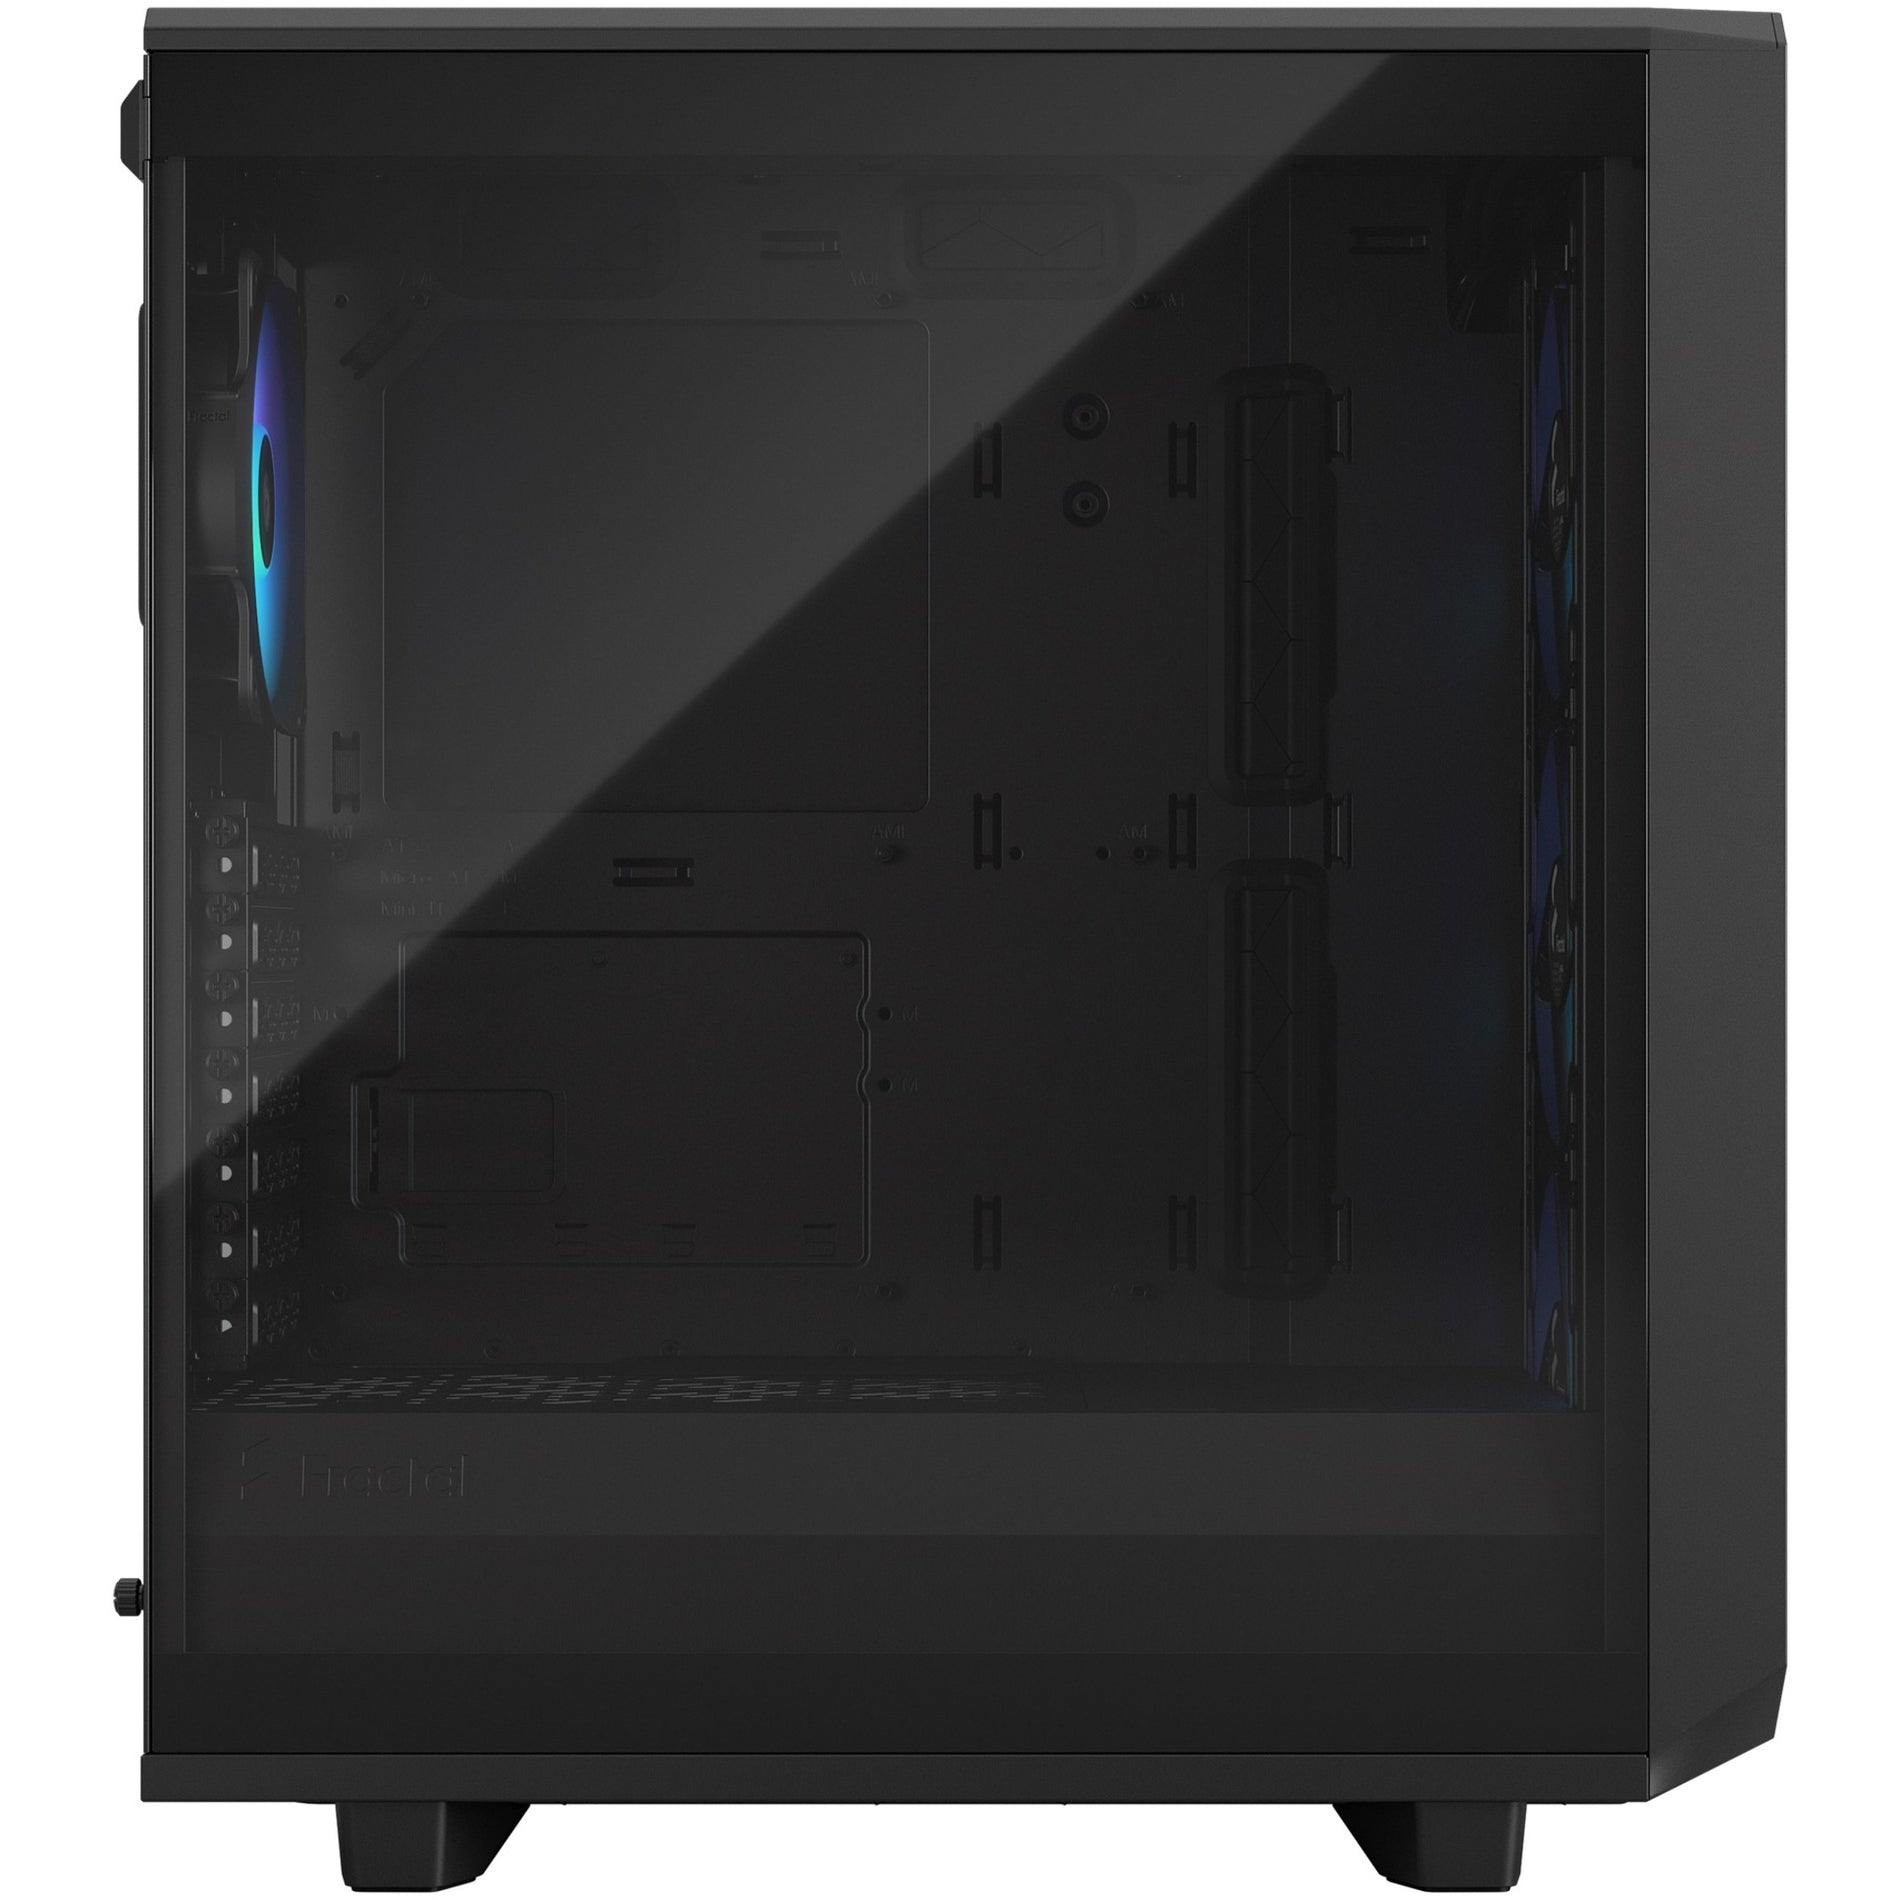 Fractal Design FD-C-MES2C-06 Meshify 2 Compact RGB Computer Case, Mid-tower, Black, 4.72" Fans, Mini ITX/Mini ATX/ATX Supported, 18.74 lb Weight